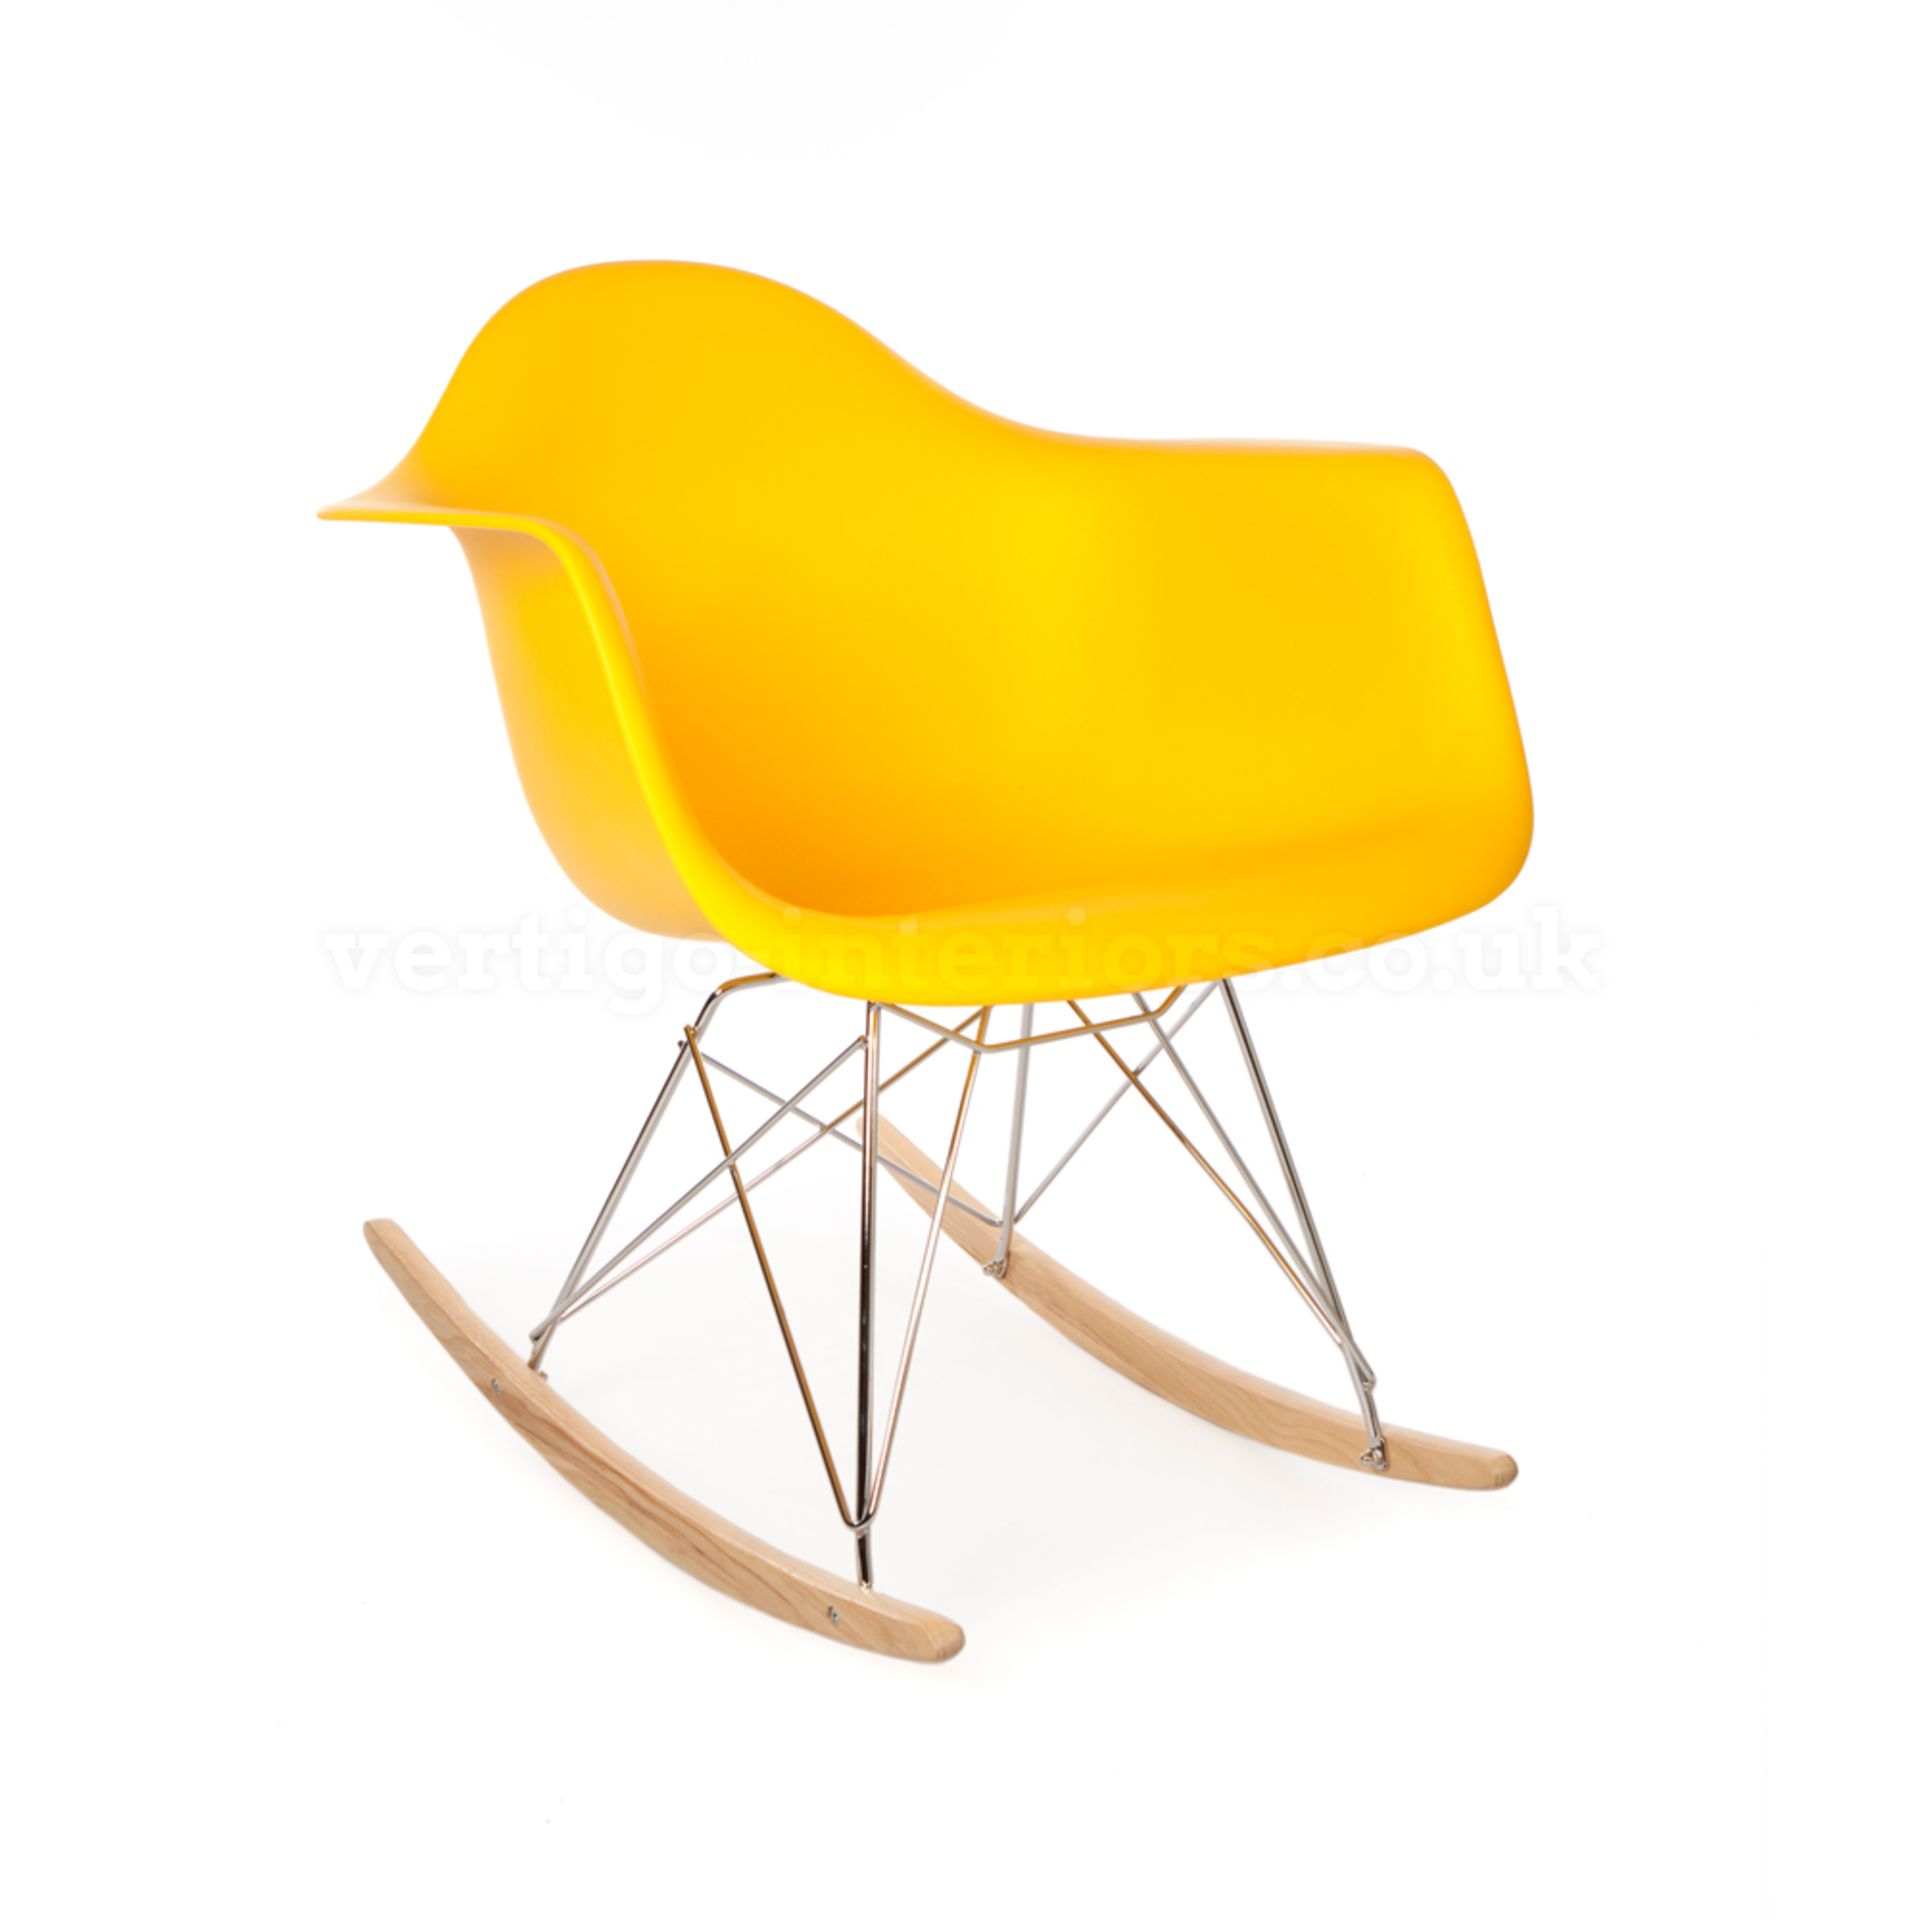 X1 BOXED BRAND NEW, EAMES STYLE ROCKER ARM CHAIR, YELLOW, RRP-£149.99 (MD-CHAIR)